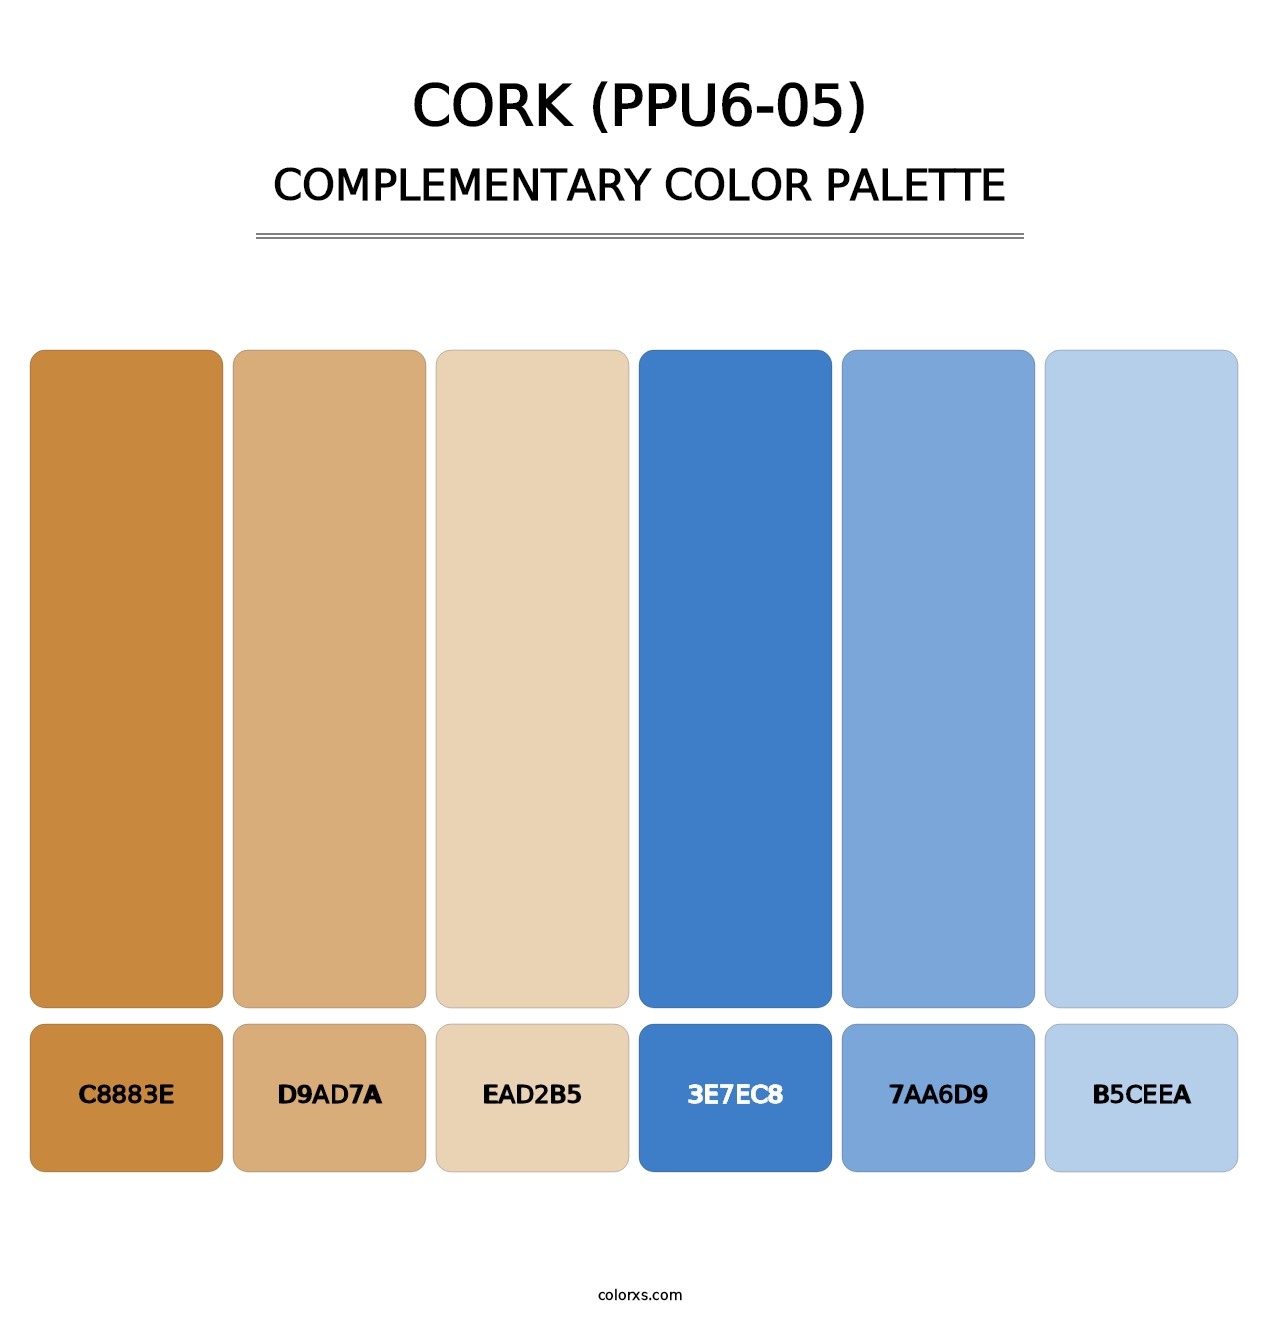 Cork (PPU6-05) - Complementary Color Palette